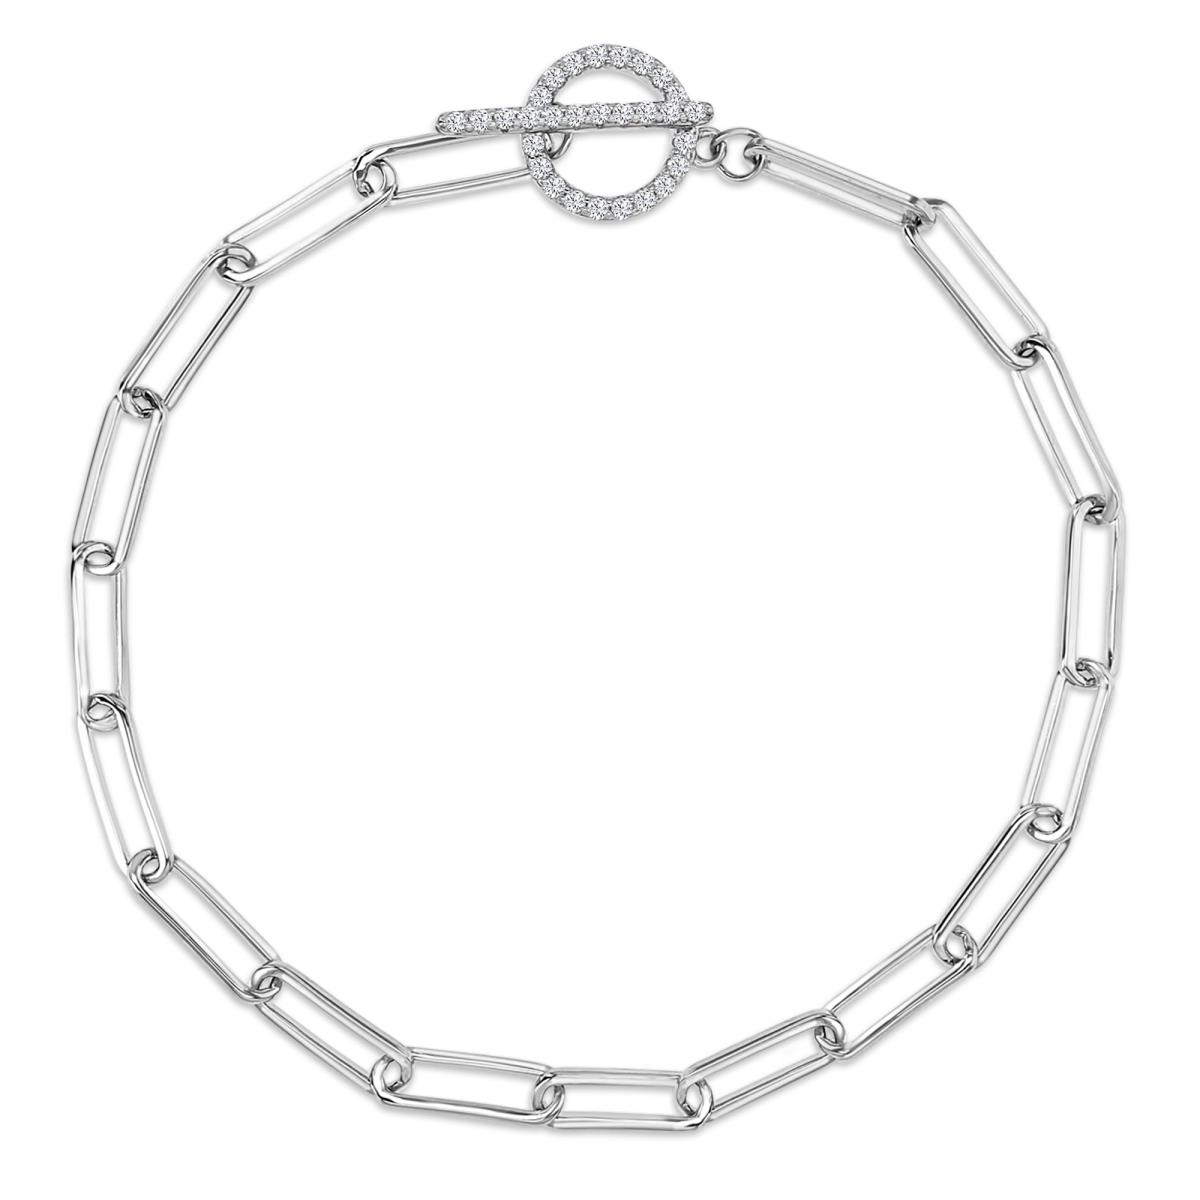 EXCLUSIVE RM Sterling Silver Rhodium 3.5mm Paperclip 7.5" Chain Bracelet with CZ Toggle